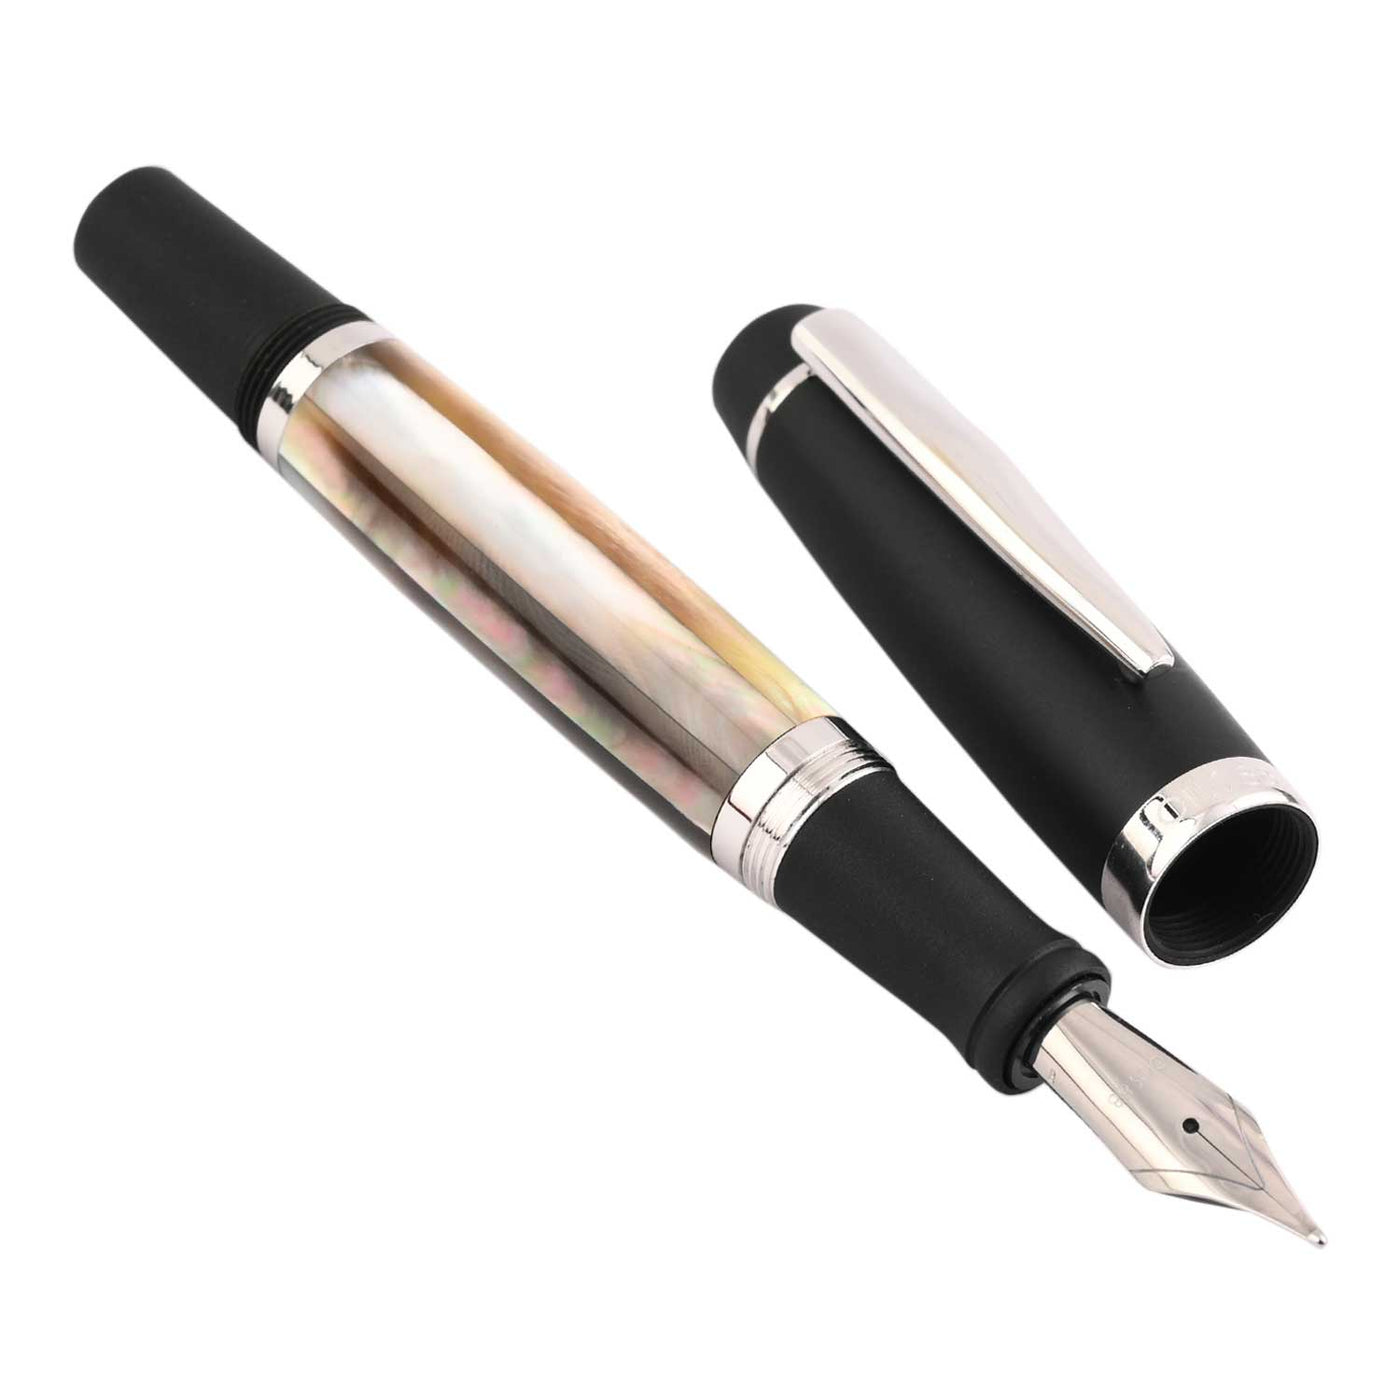 Opus 88 Shell Fountain Pen - Black Mother of Pearl 2